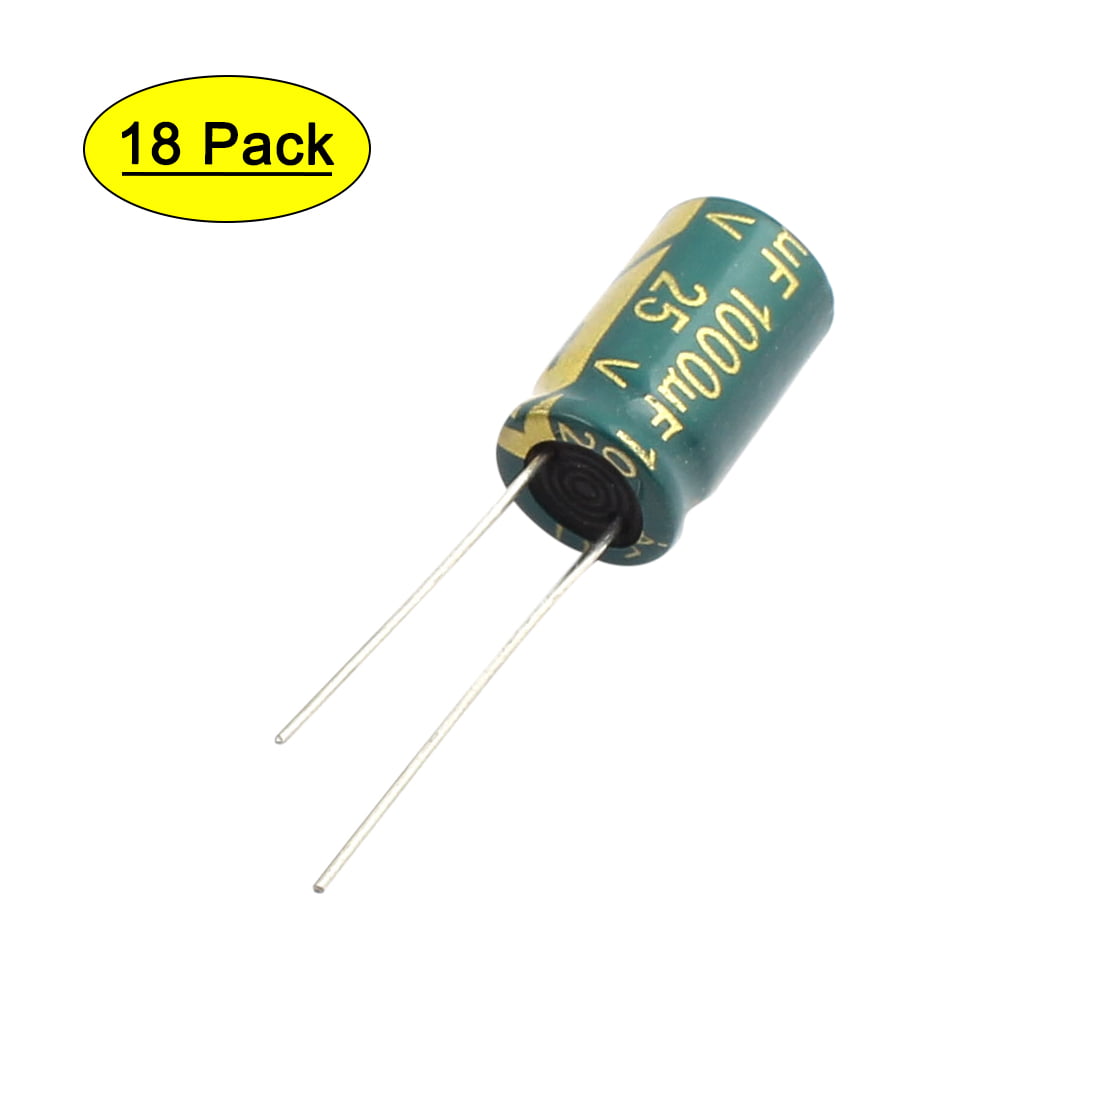 10 x Electrolytic Capacitor 10µF 16V 20% Radial 5mm x 11mm Pack of 10